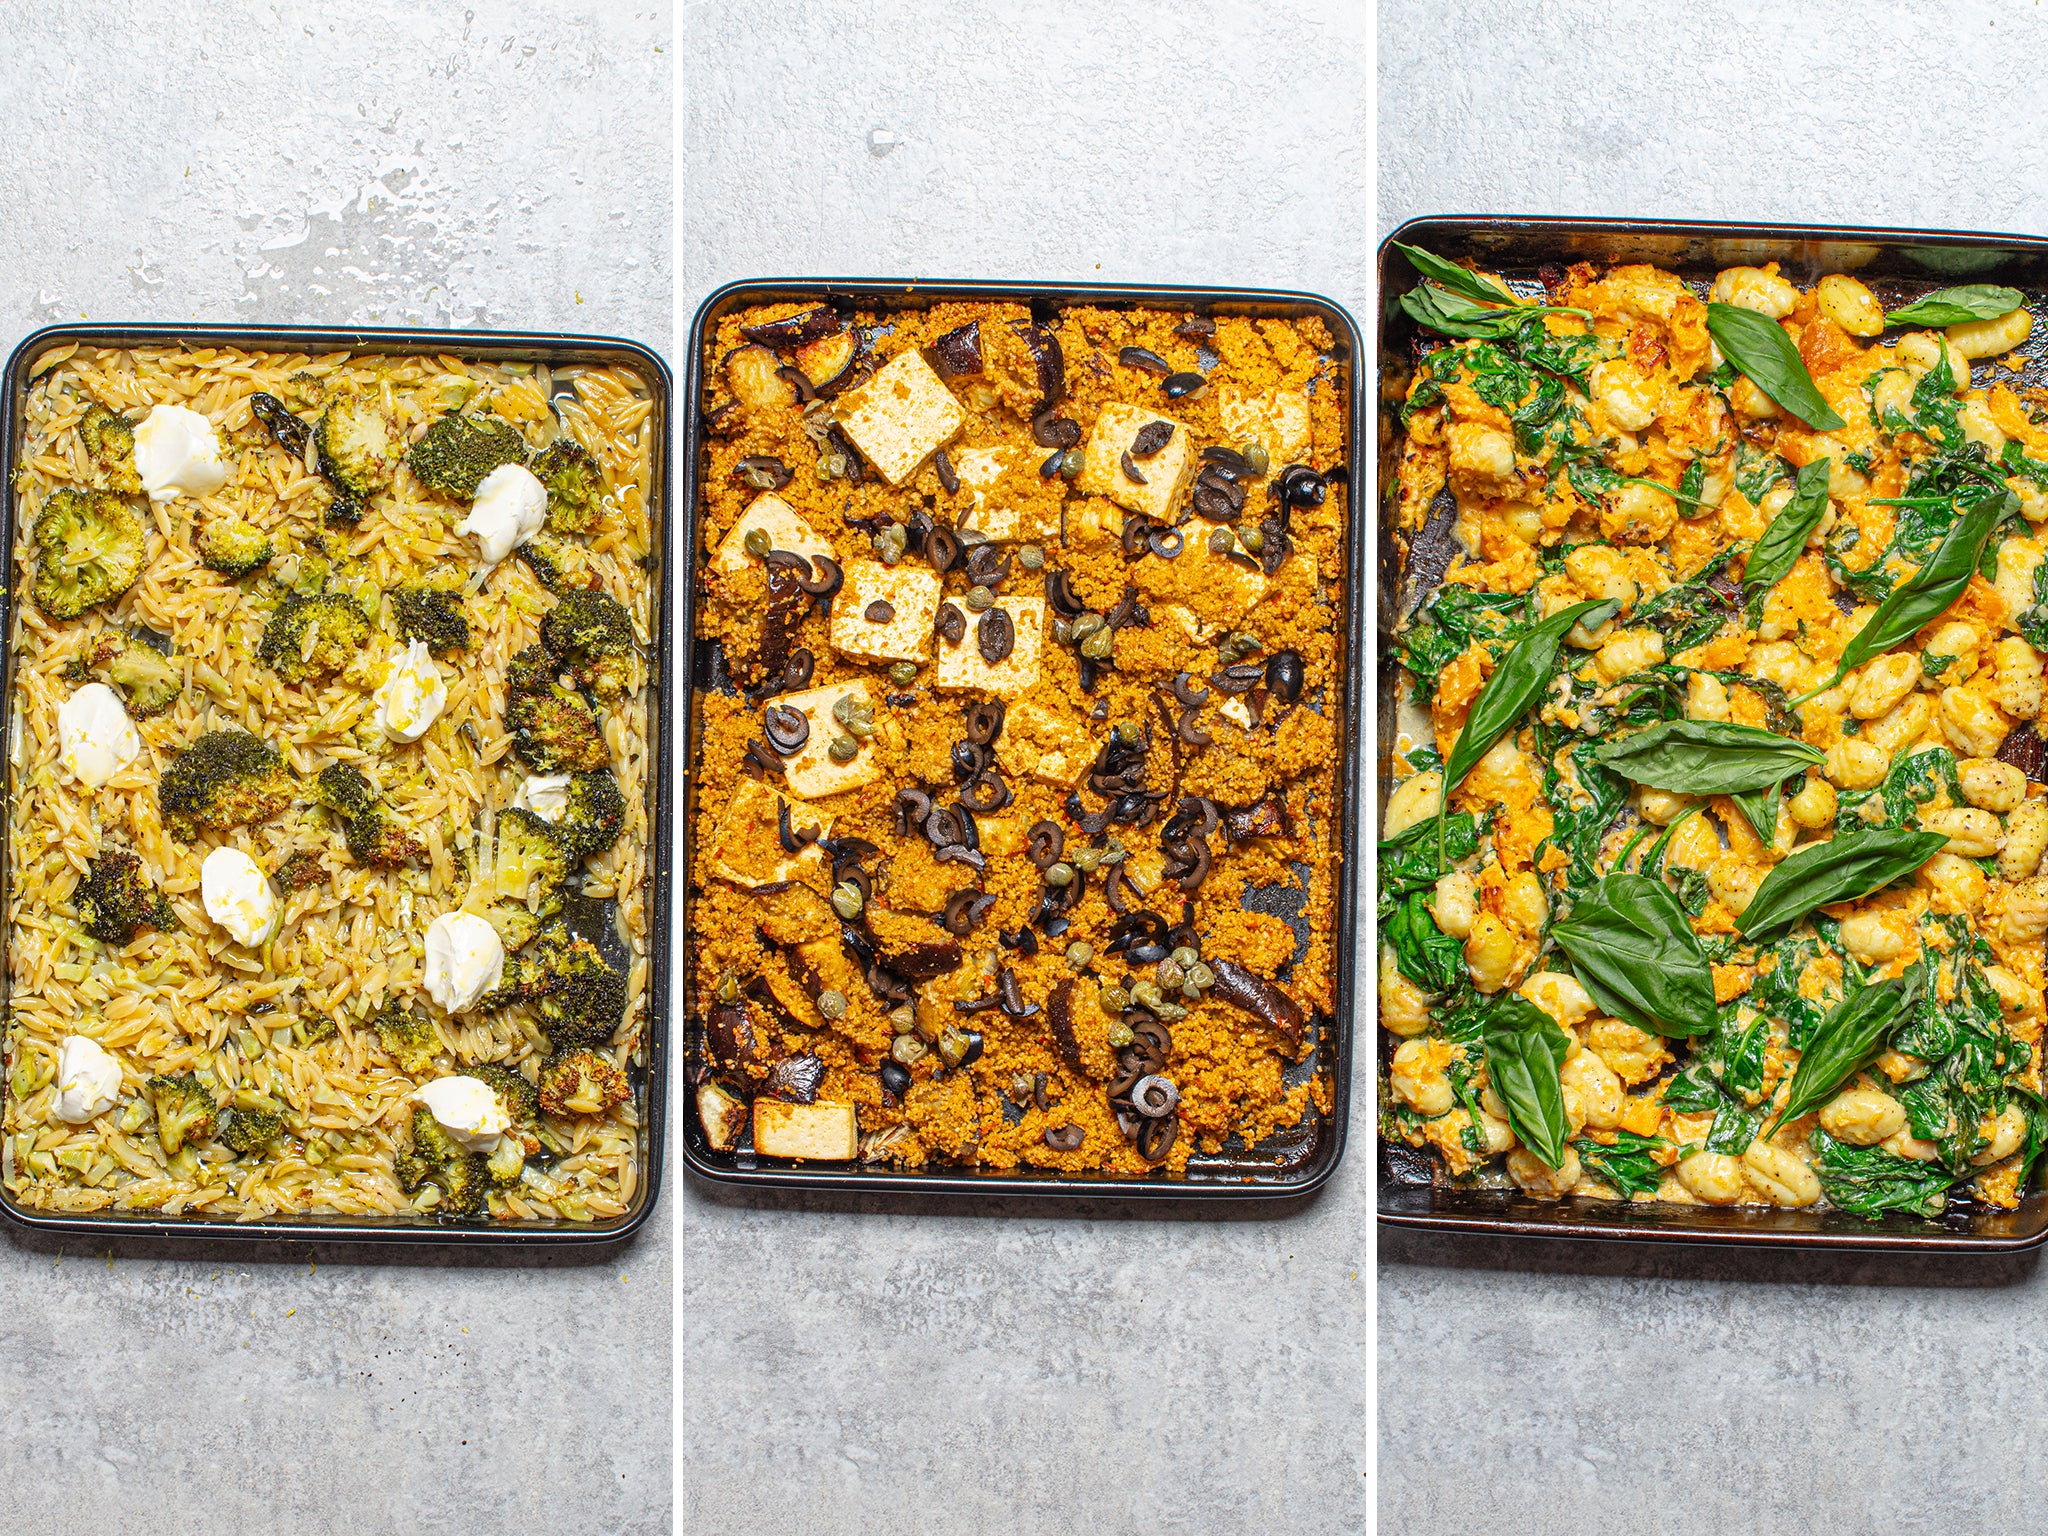 One-pan recipes also reduce food waste and use less energy